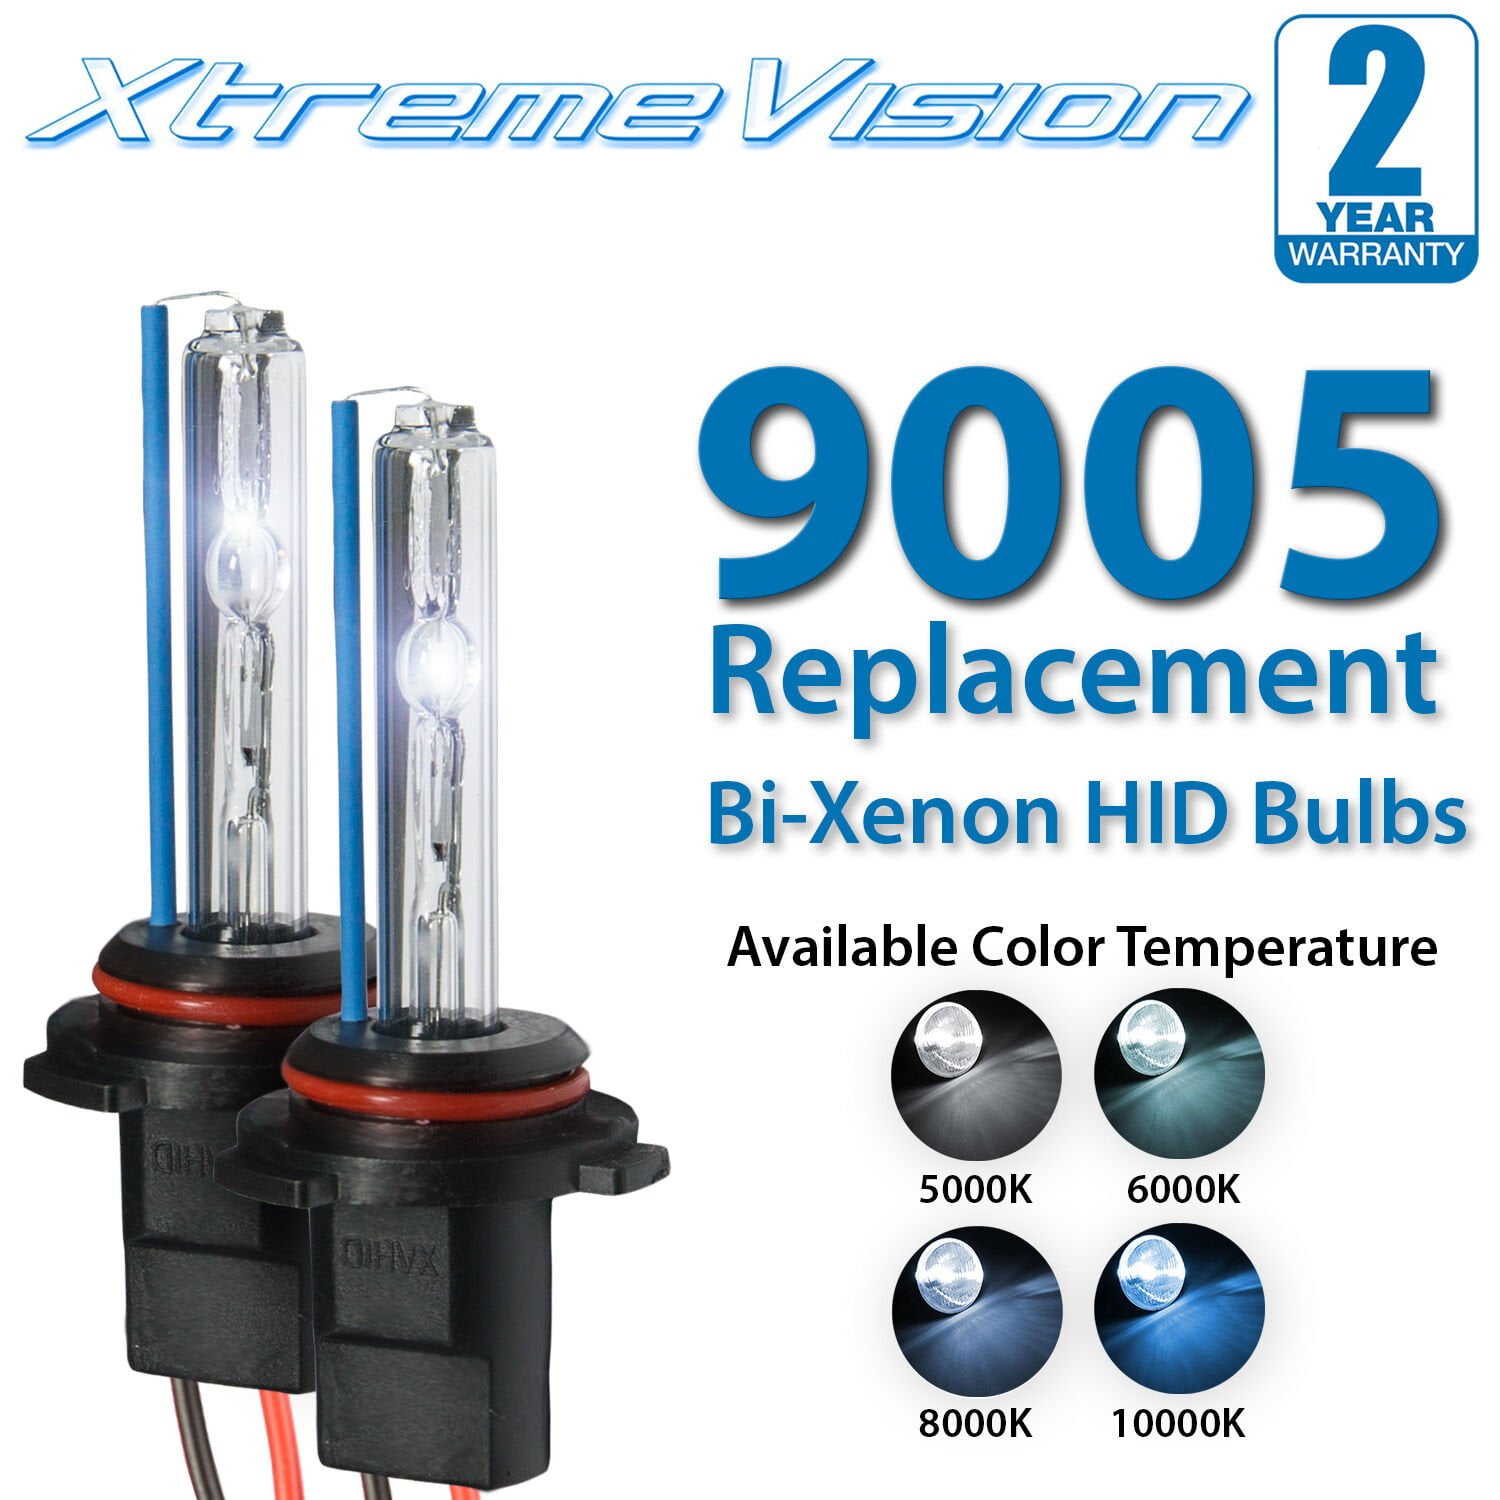 Dark Blue 1 Pair - 2 Year Warranty H1 10000K XtremeVision HID Xenon Replacement Bulbs 